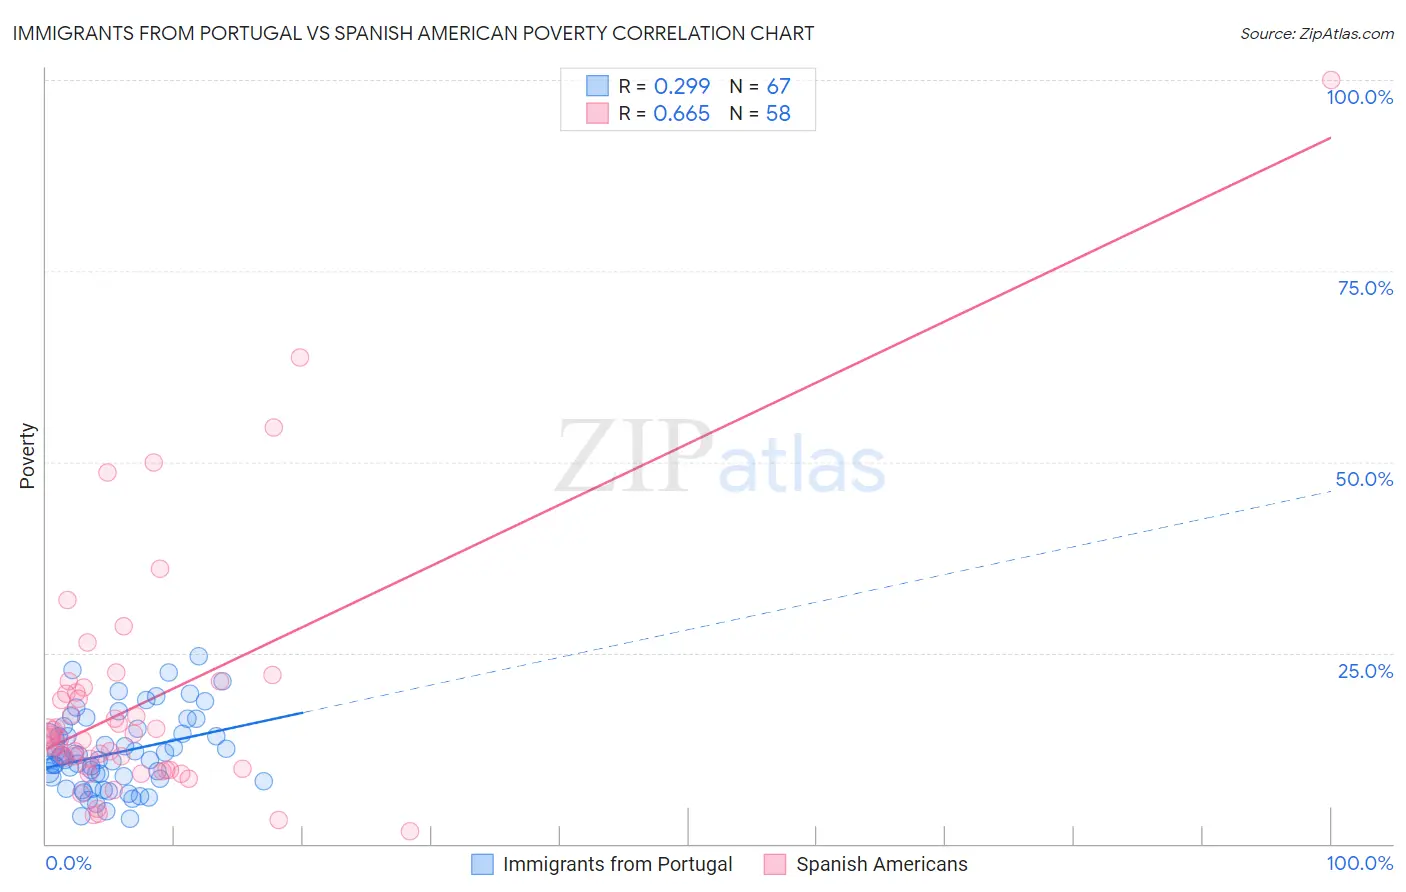 Immigrants from Portugal vs Spanish American Poverty